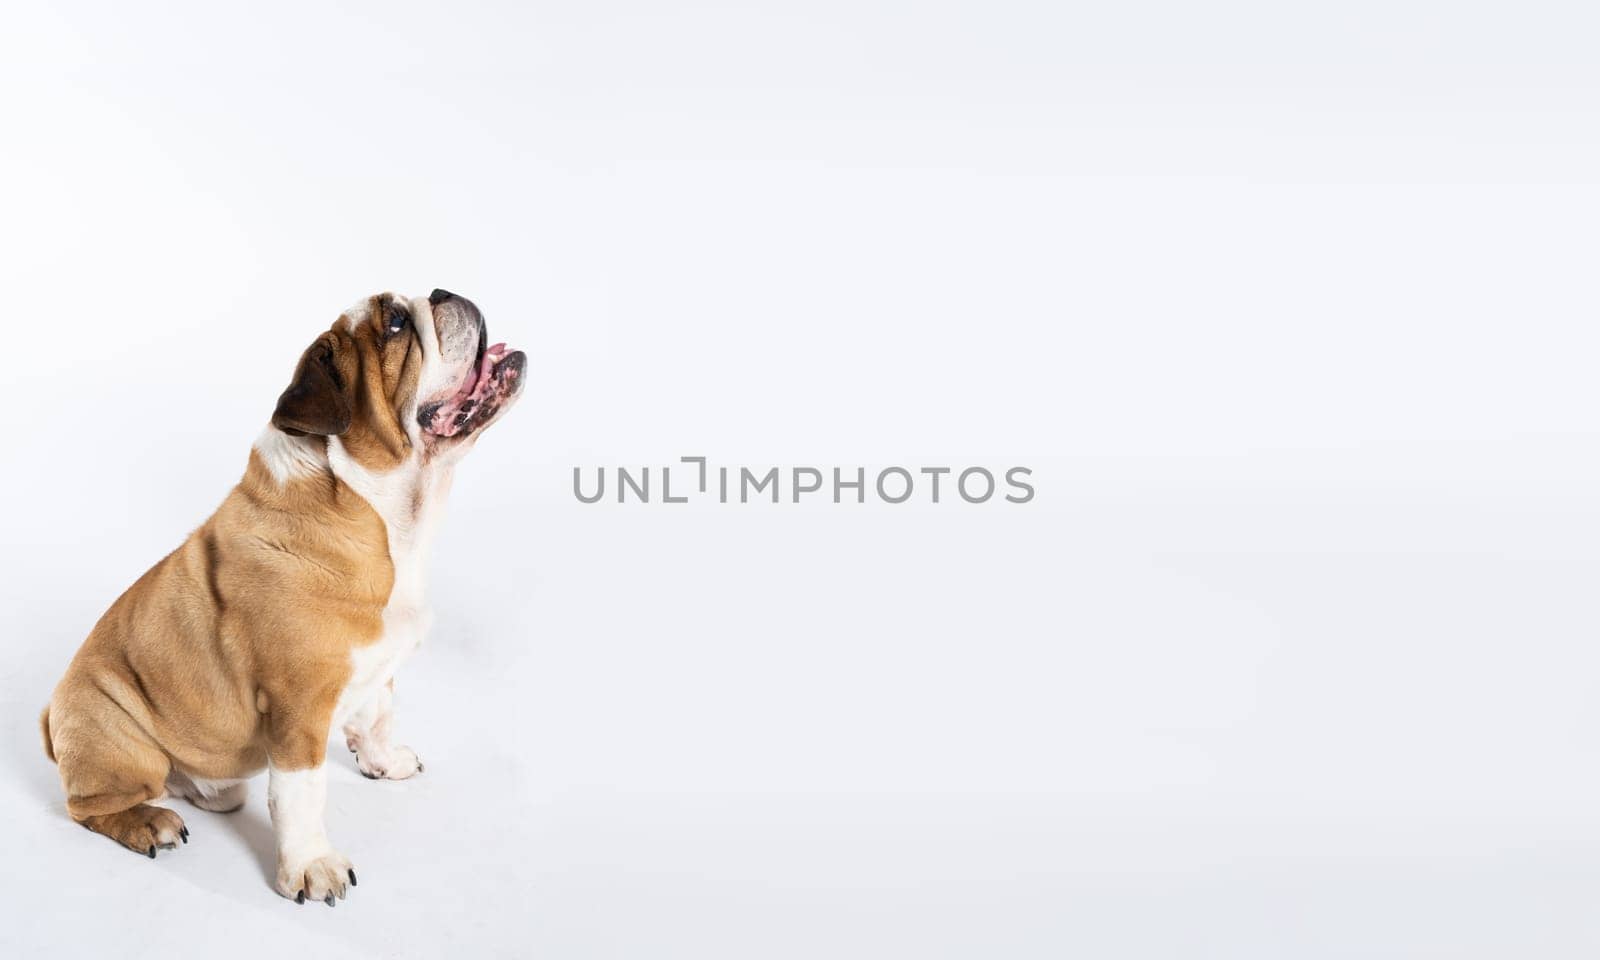 The dog is sitting and panting with its tongue outstretched. The English Bulldog was bred as a companion and deterrent dog. A breed with a brown coat with white patches. Panoramic frame.